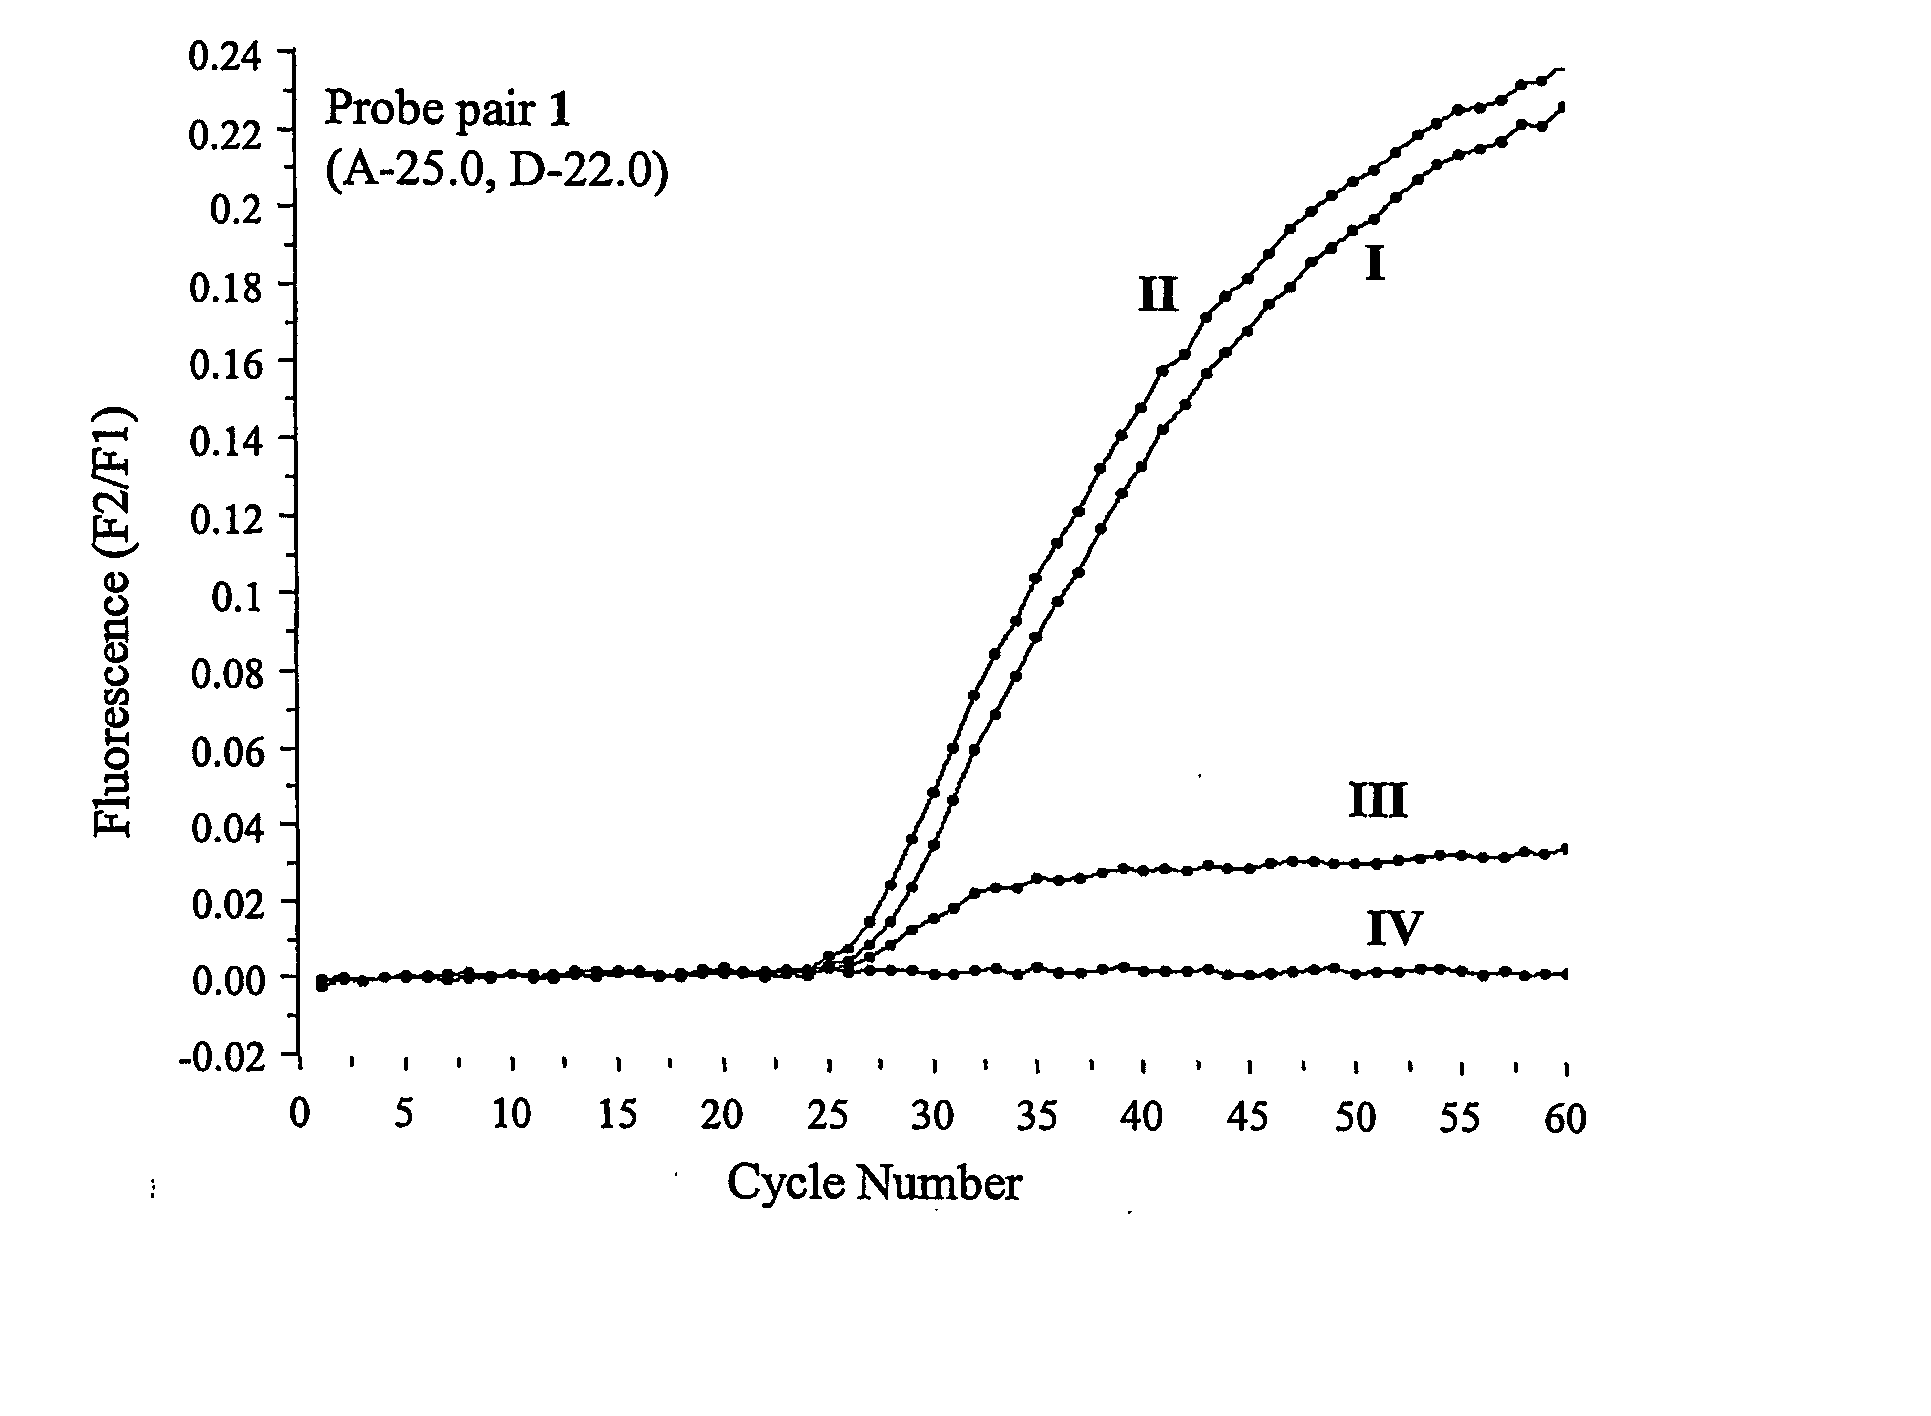 Fluorogenic Nucleic Acid Probes Including Lna for Methods to Detect and/or Quantify Nucleic Acid Analytes